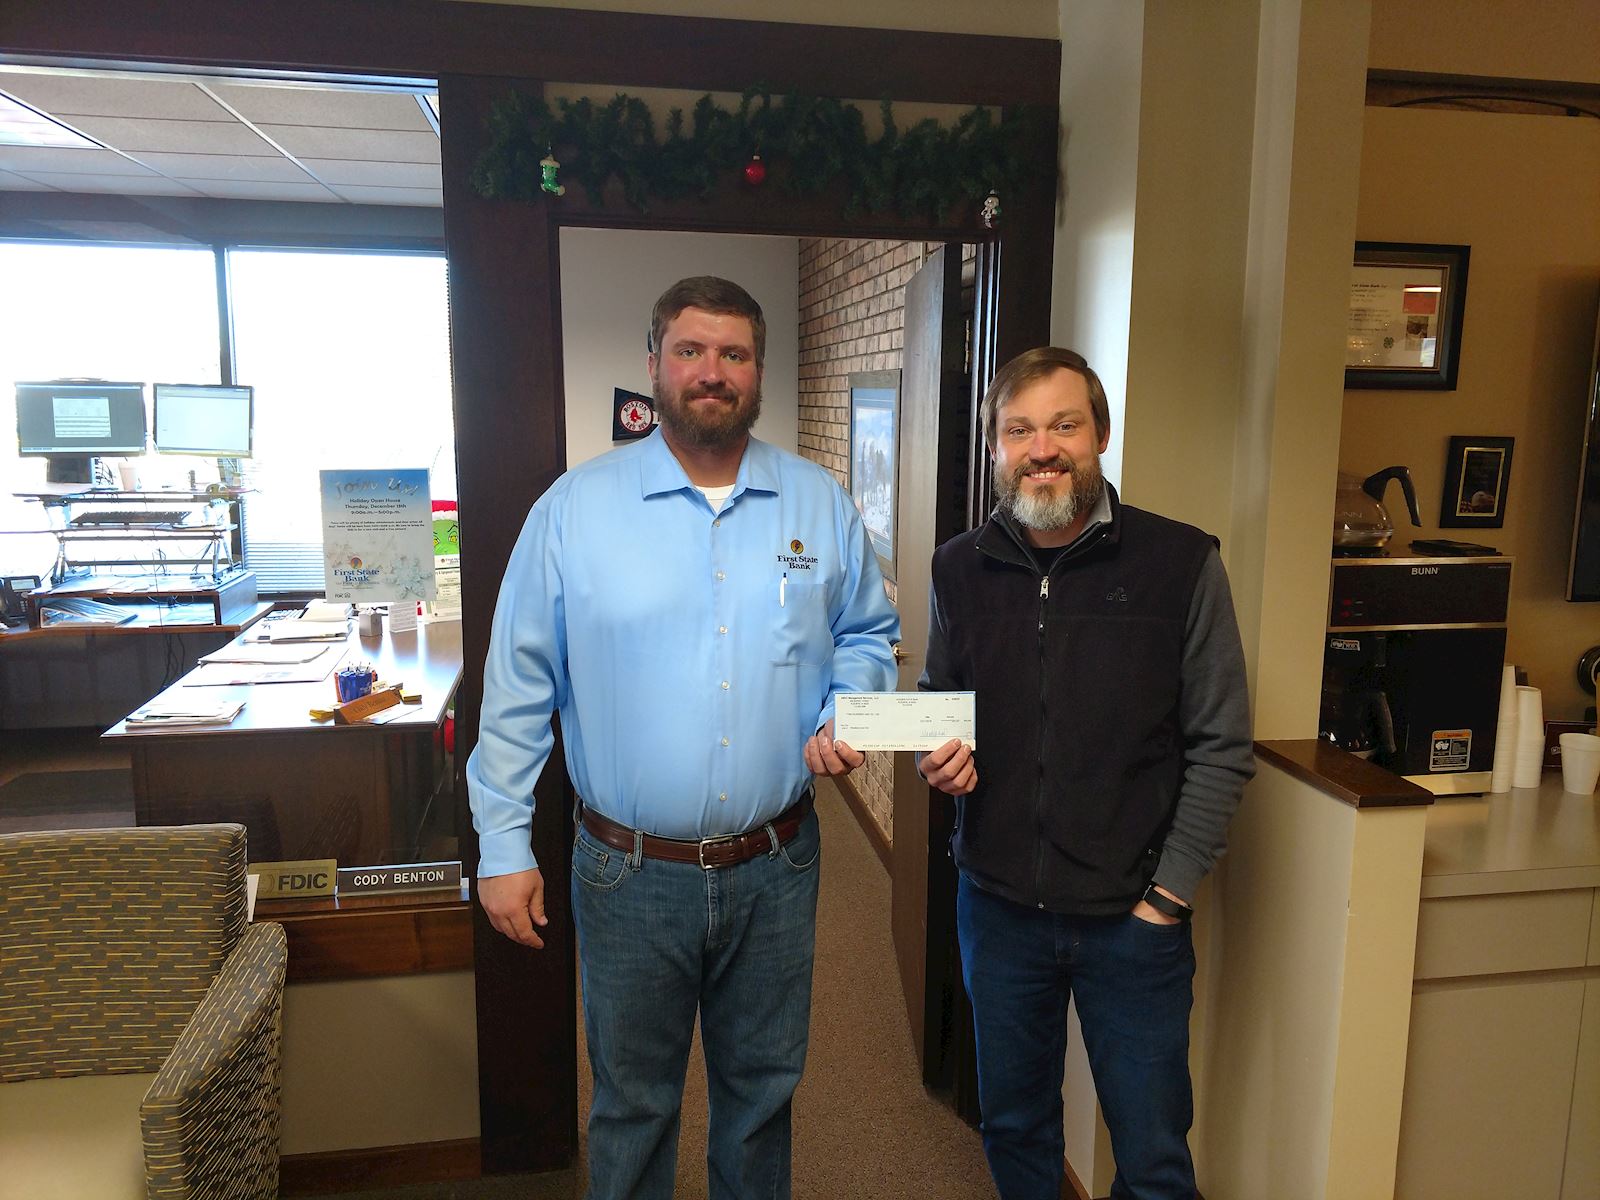 Wheatland Lions Club receives donation in honor of the partners of AMVC